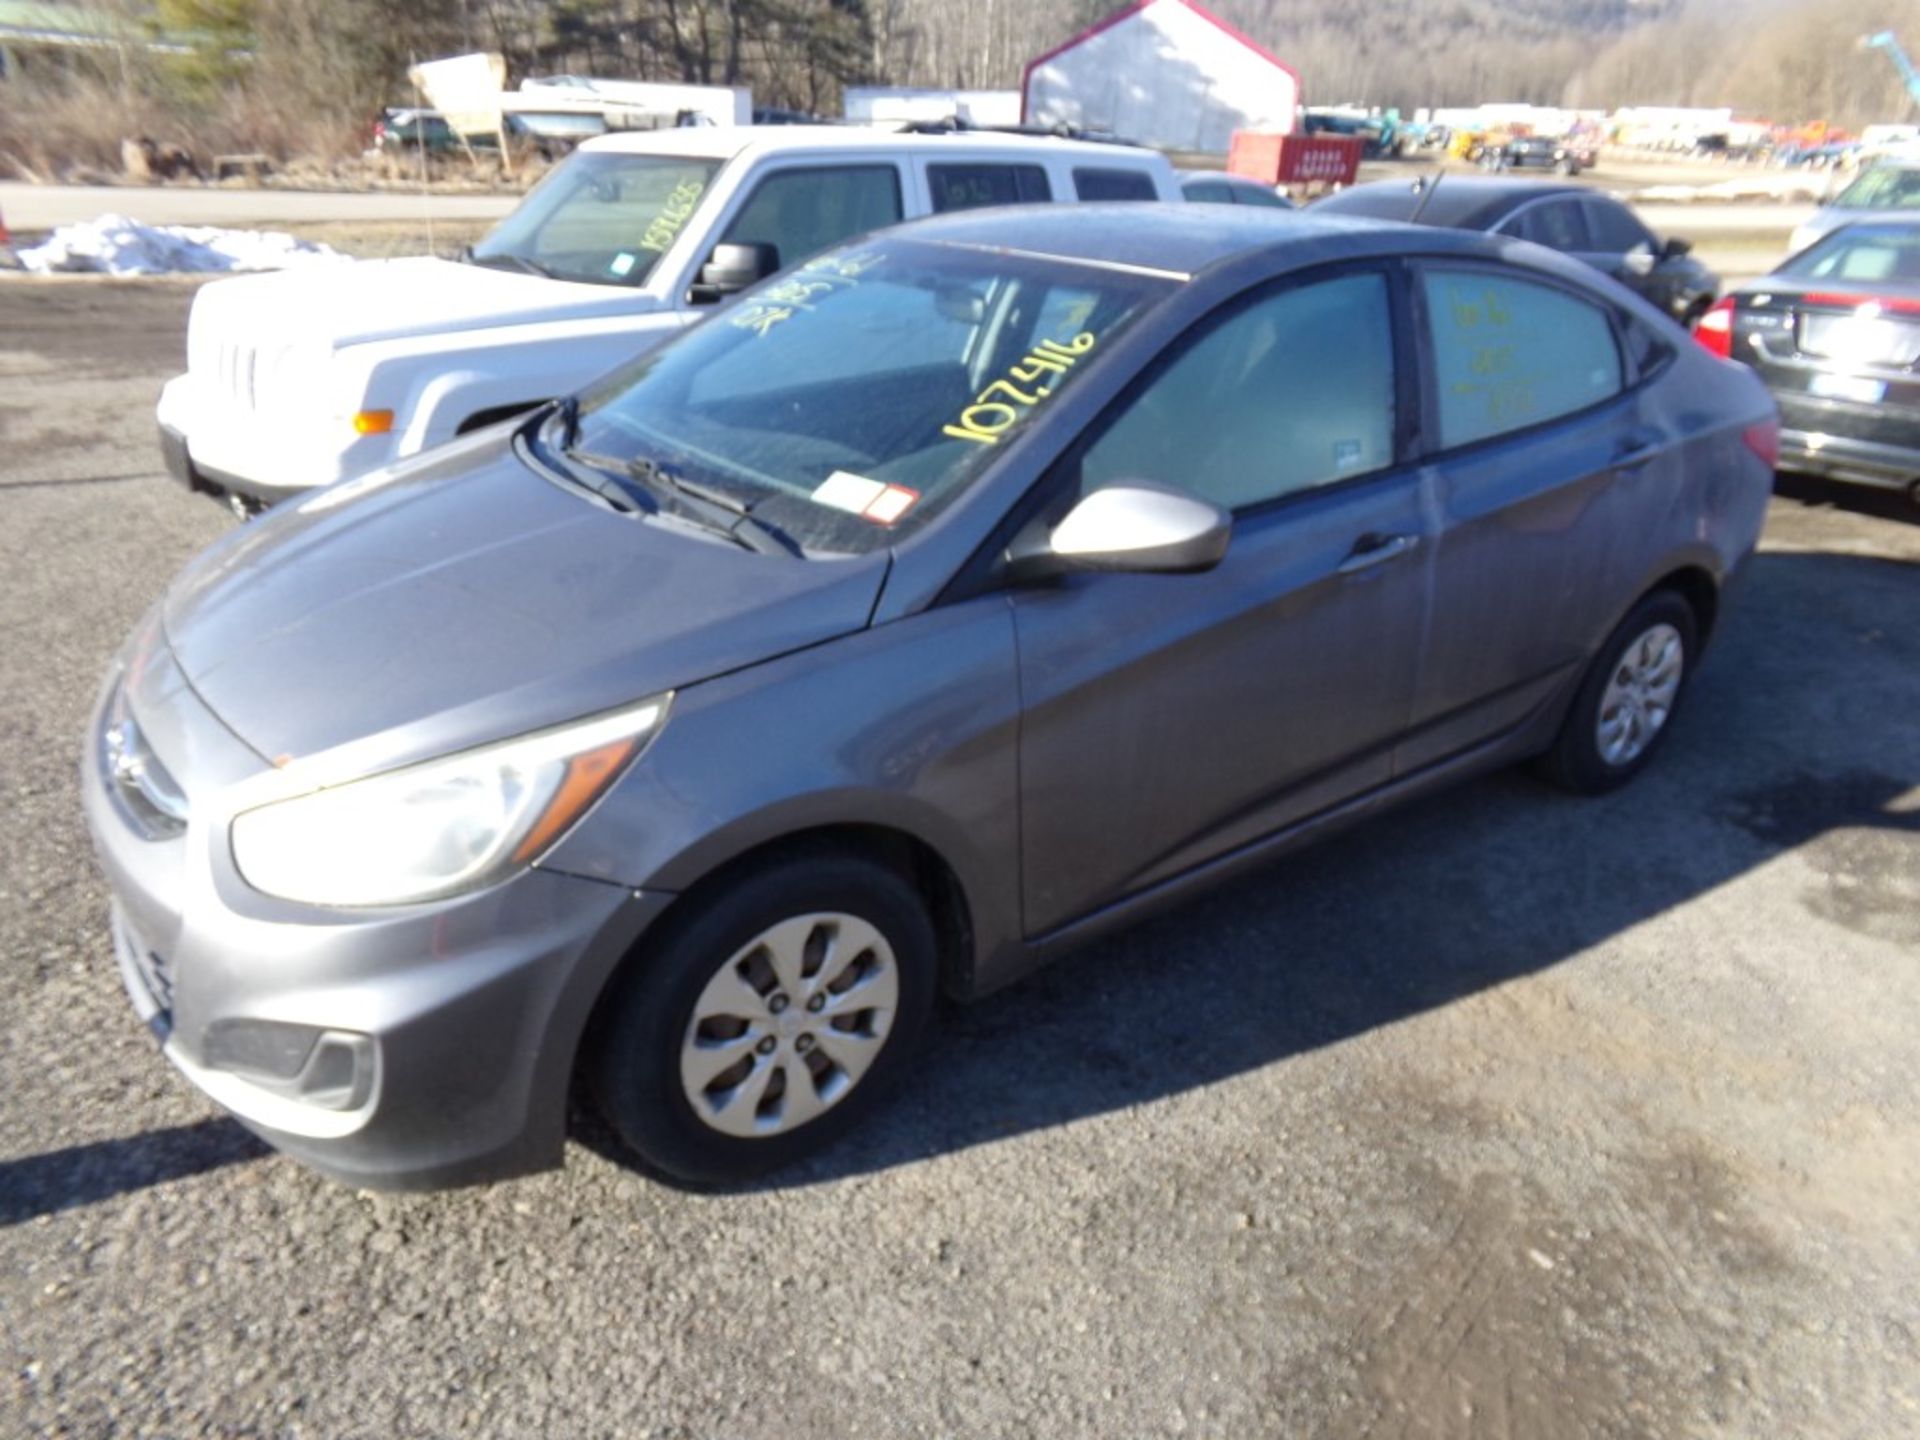 2015 Hyundai Accent GLS, Gray, 107,416 Miles, VIN# KMHCT4AE2FU914723 - OPEN TO ALL BUYERS, SMALL